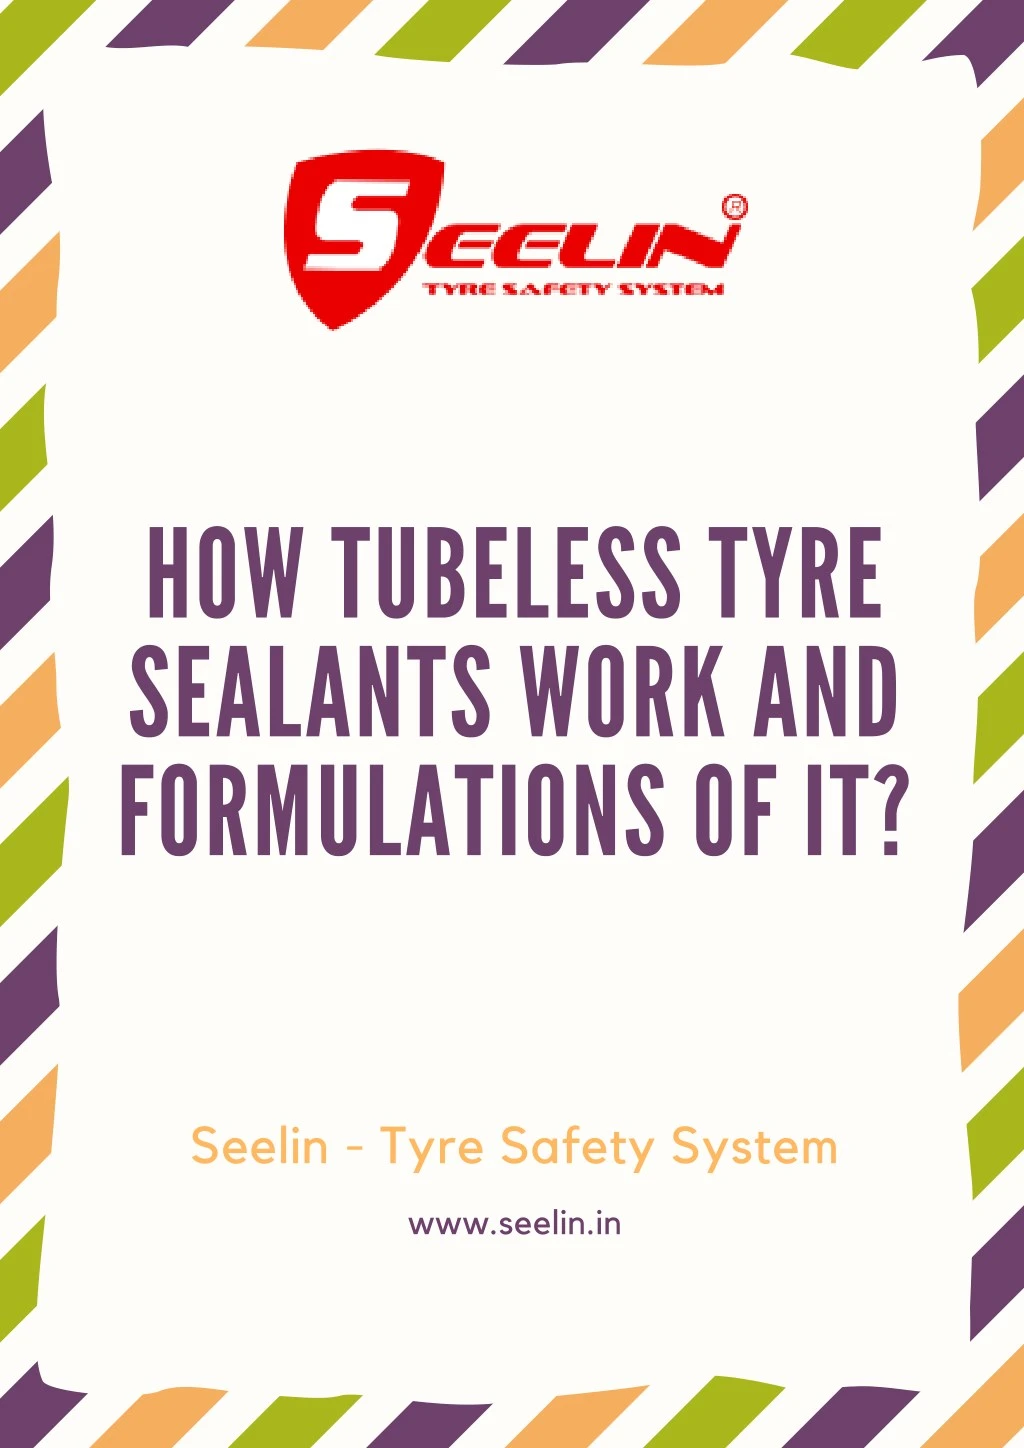 how tubeless tyre se a l a nts work a nd formul